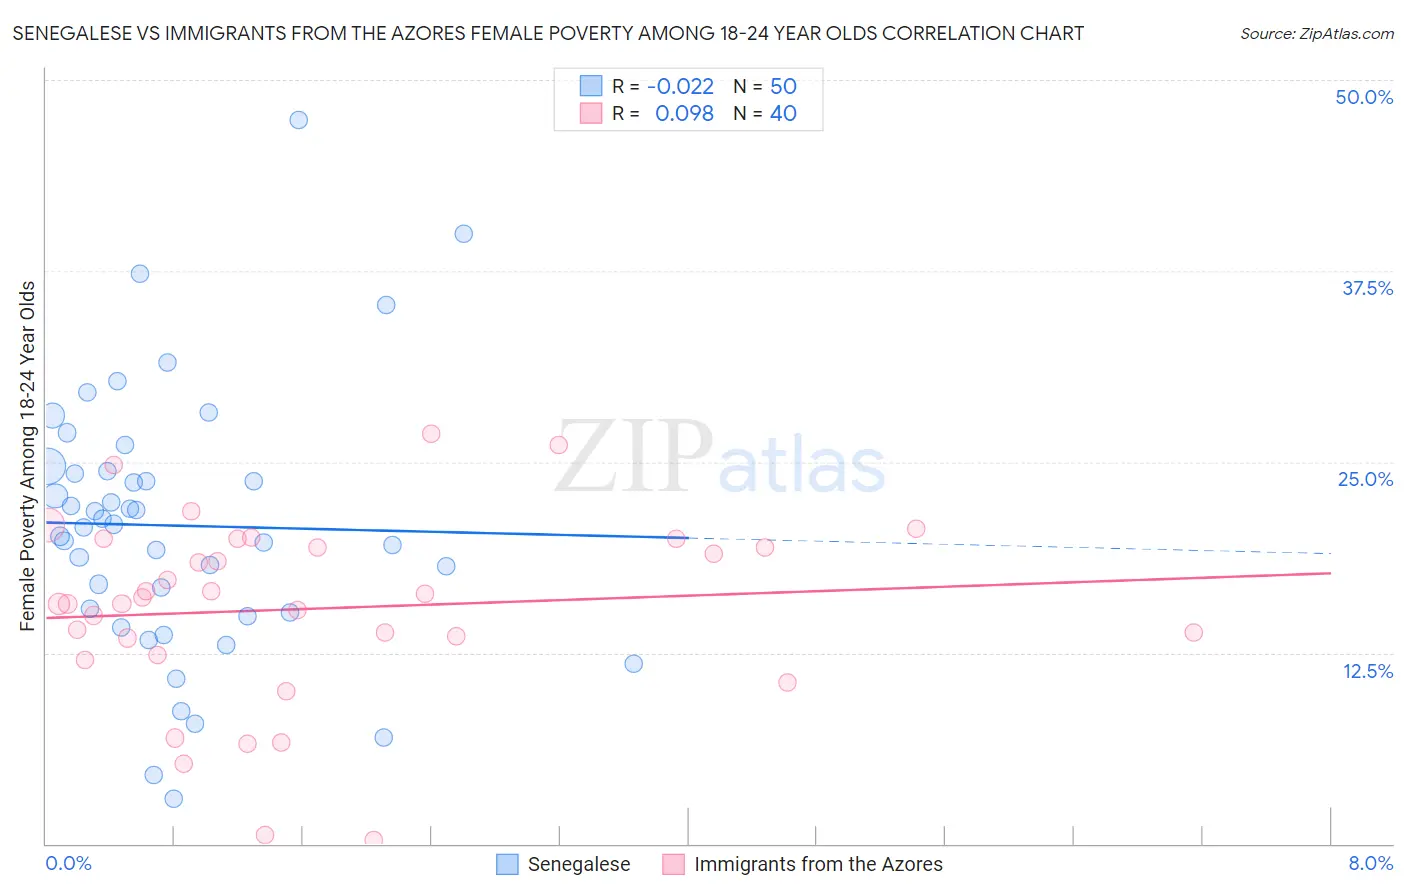 Senegalese vs Immigrants from the Azores Female Poverty Among 18-24 Year Olds